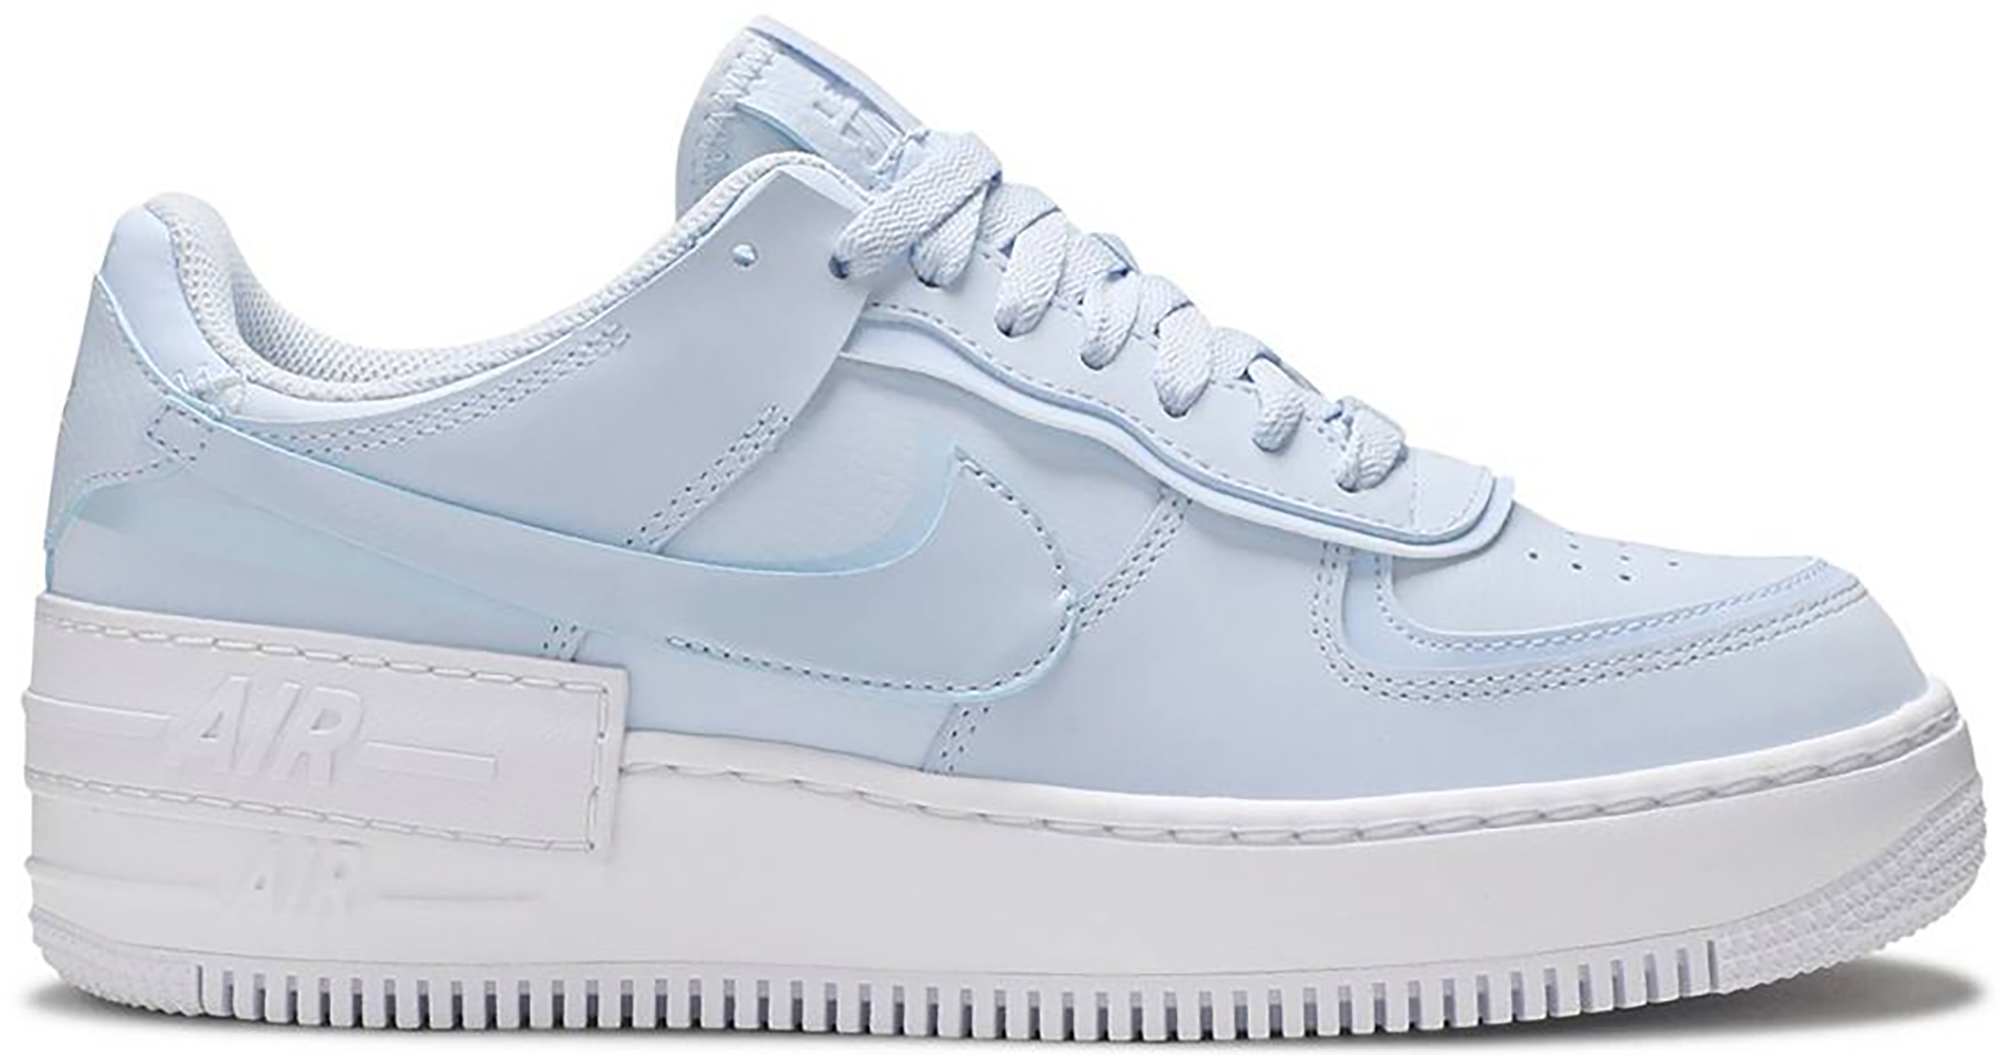 air force one low white hydrogen blue